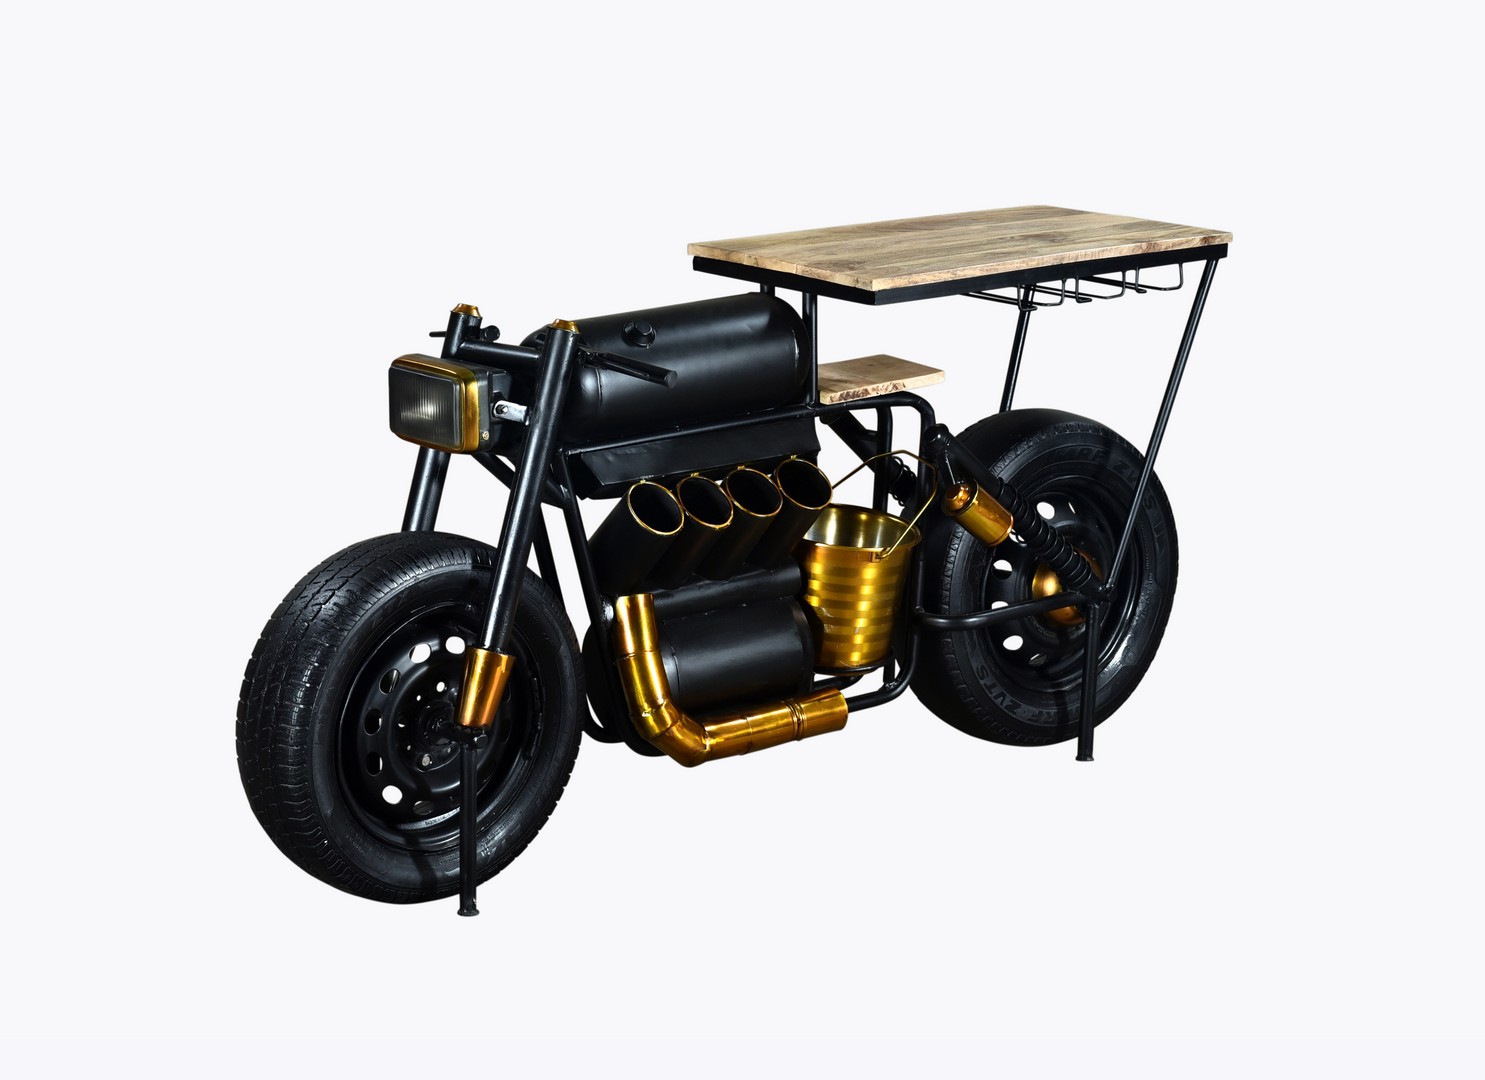 17" X 70.5" X 33" Black and Gold Motorcycle Wine Bar